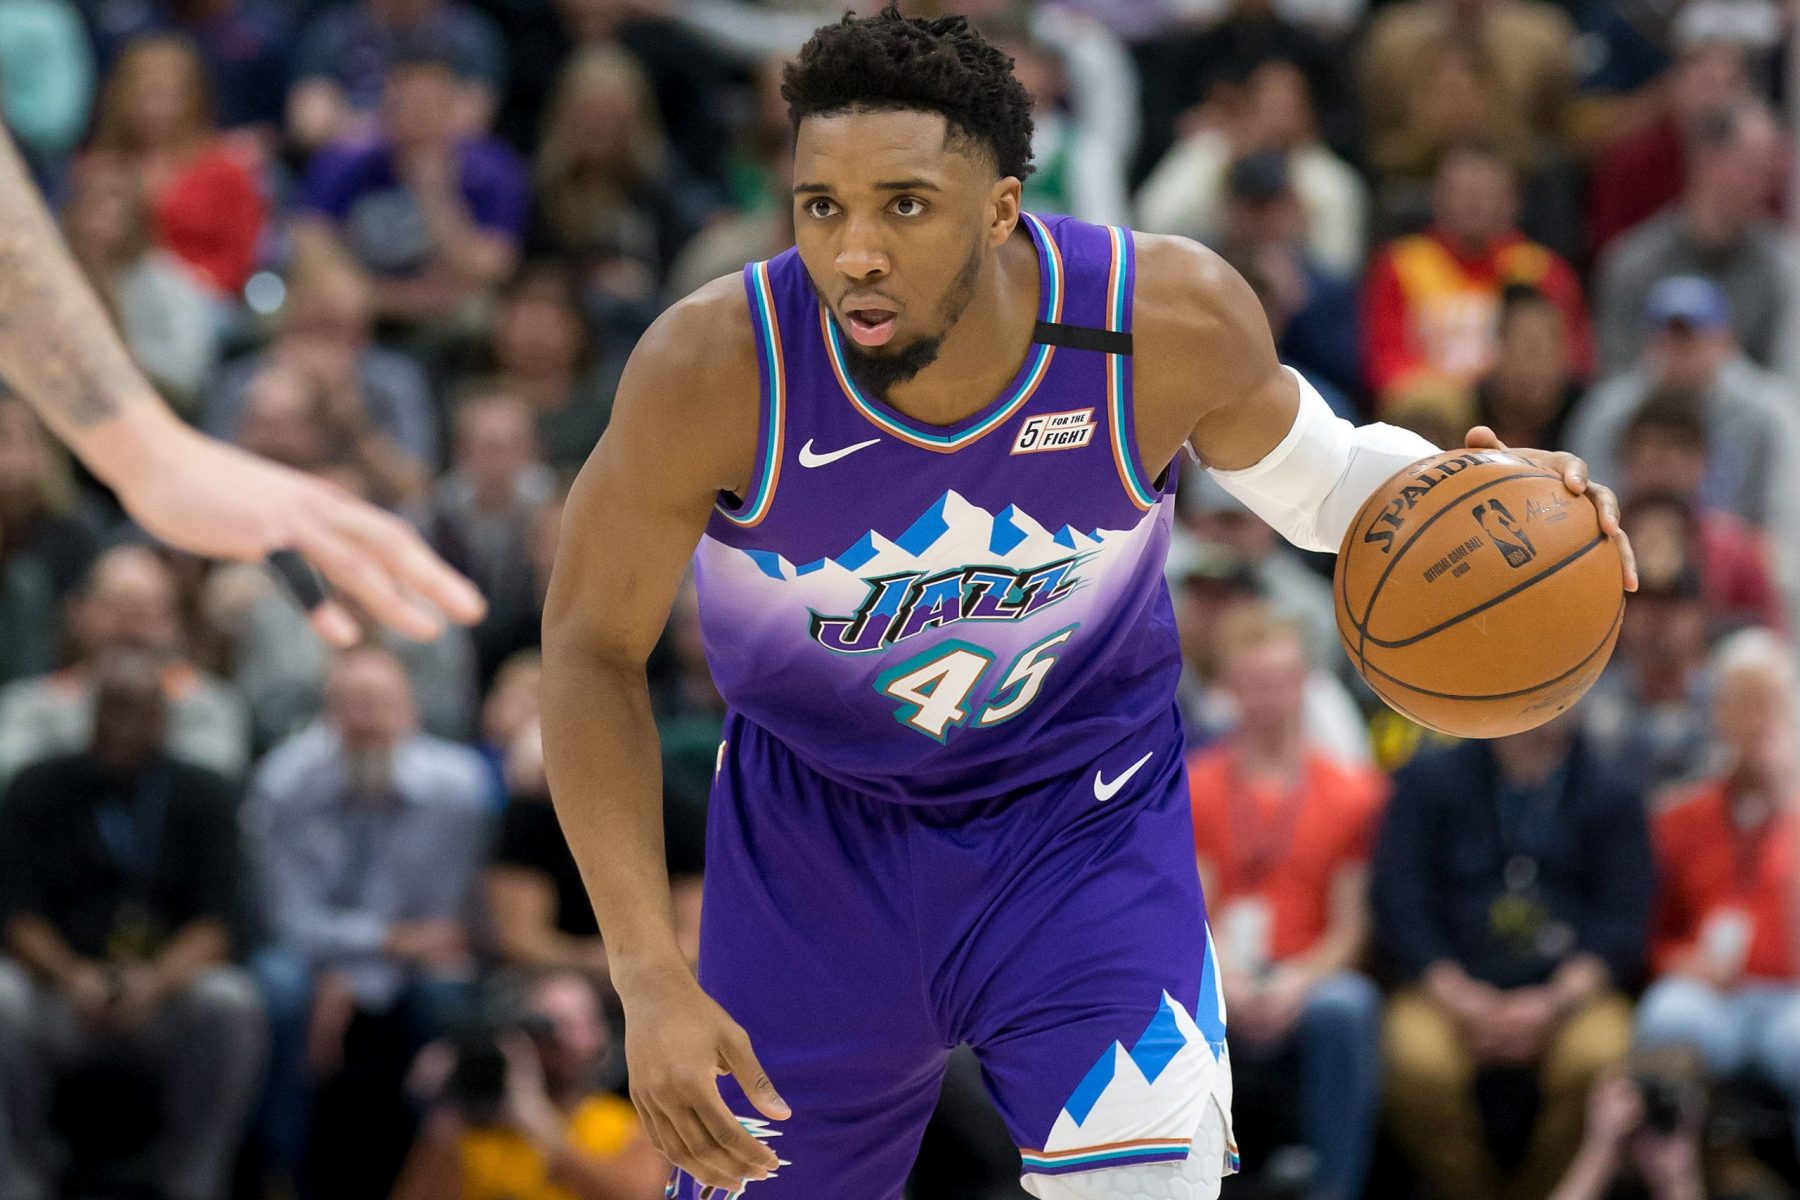 Utah Jazz: The purple mountain unis may be coming back (and that's